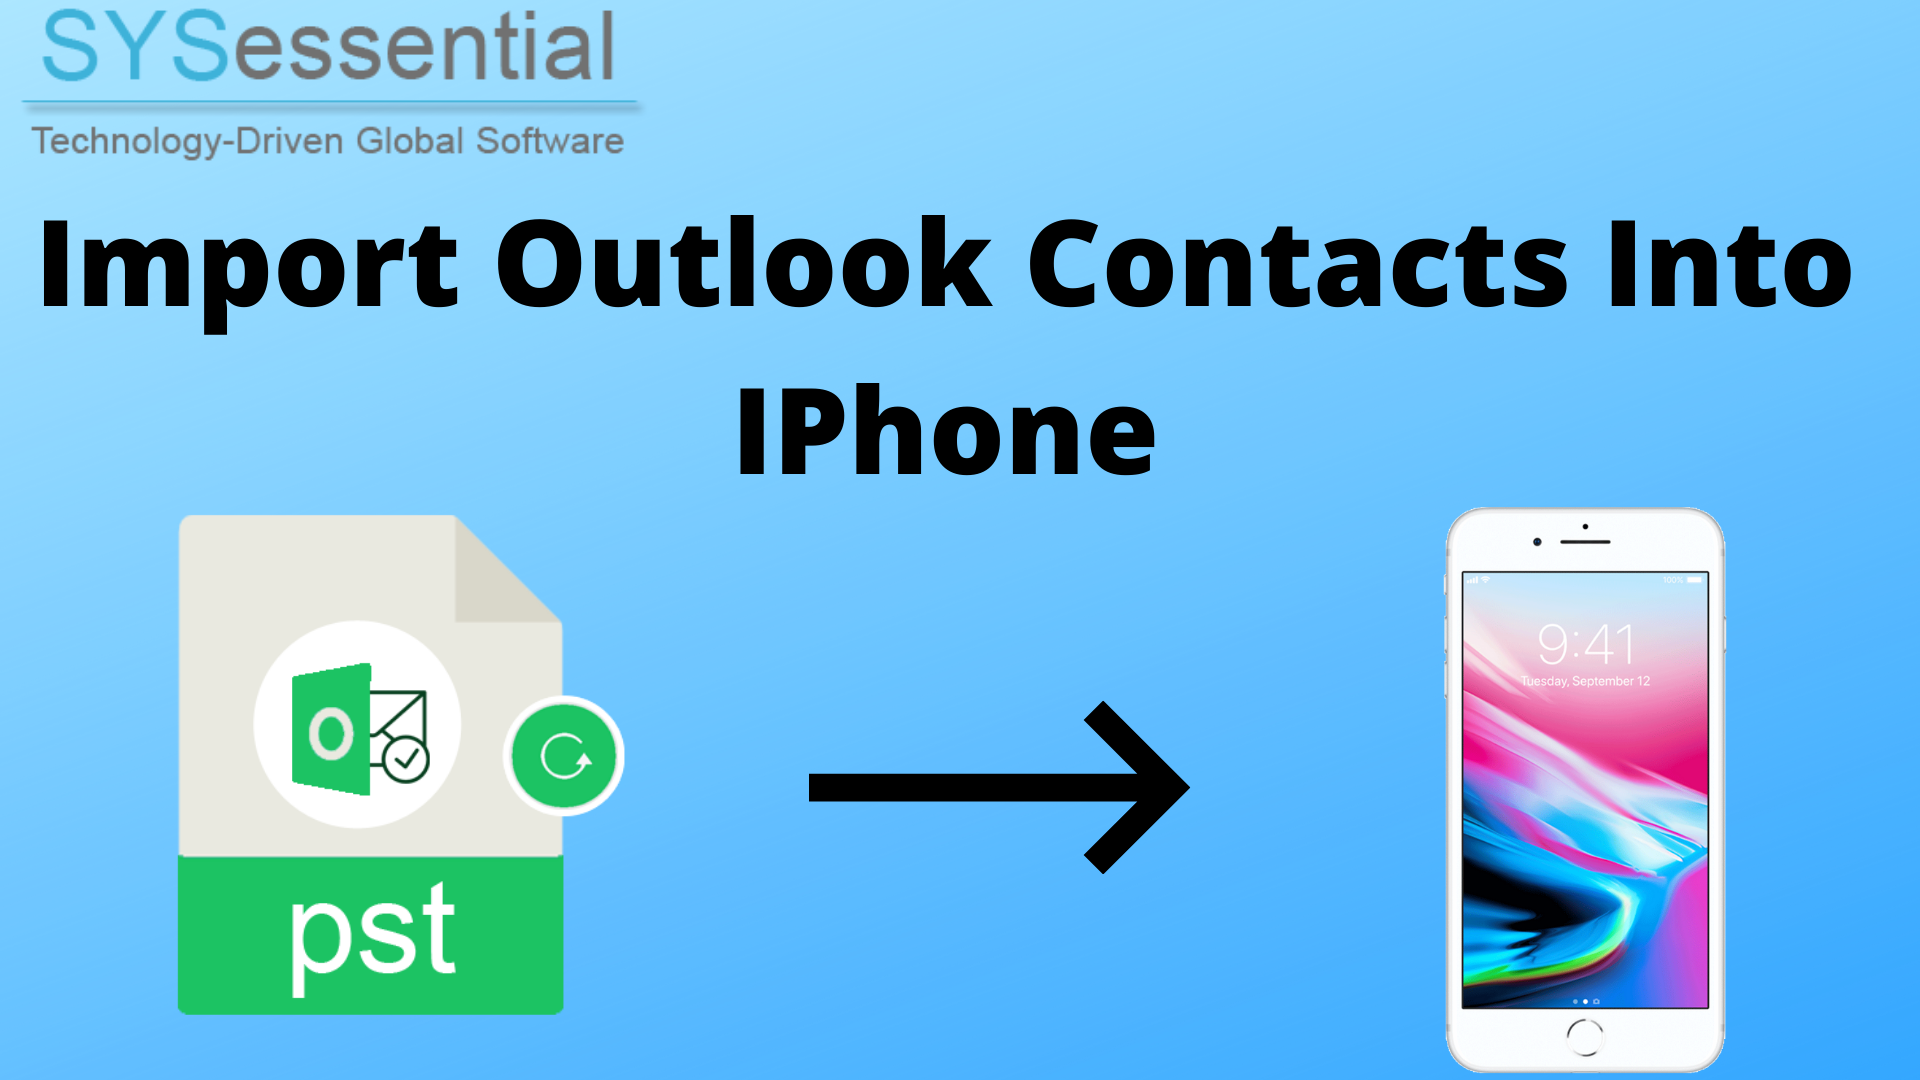 Process To Import Outlook Contacts Into iPhone